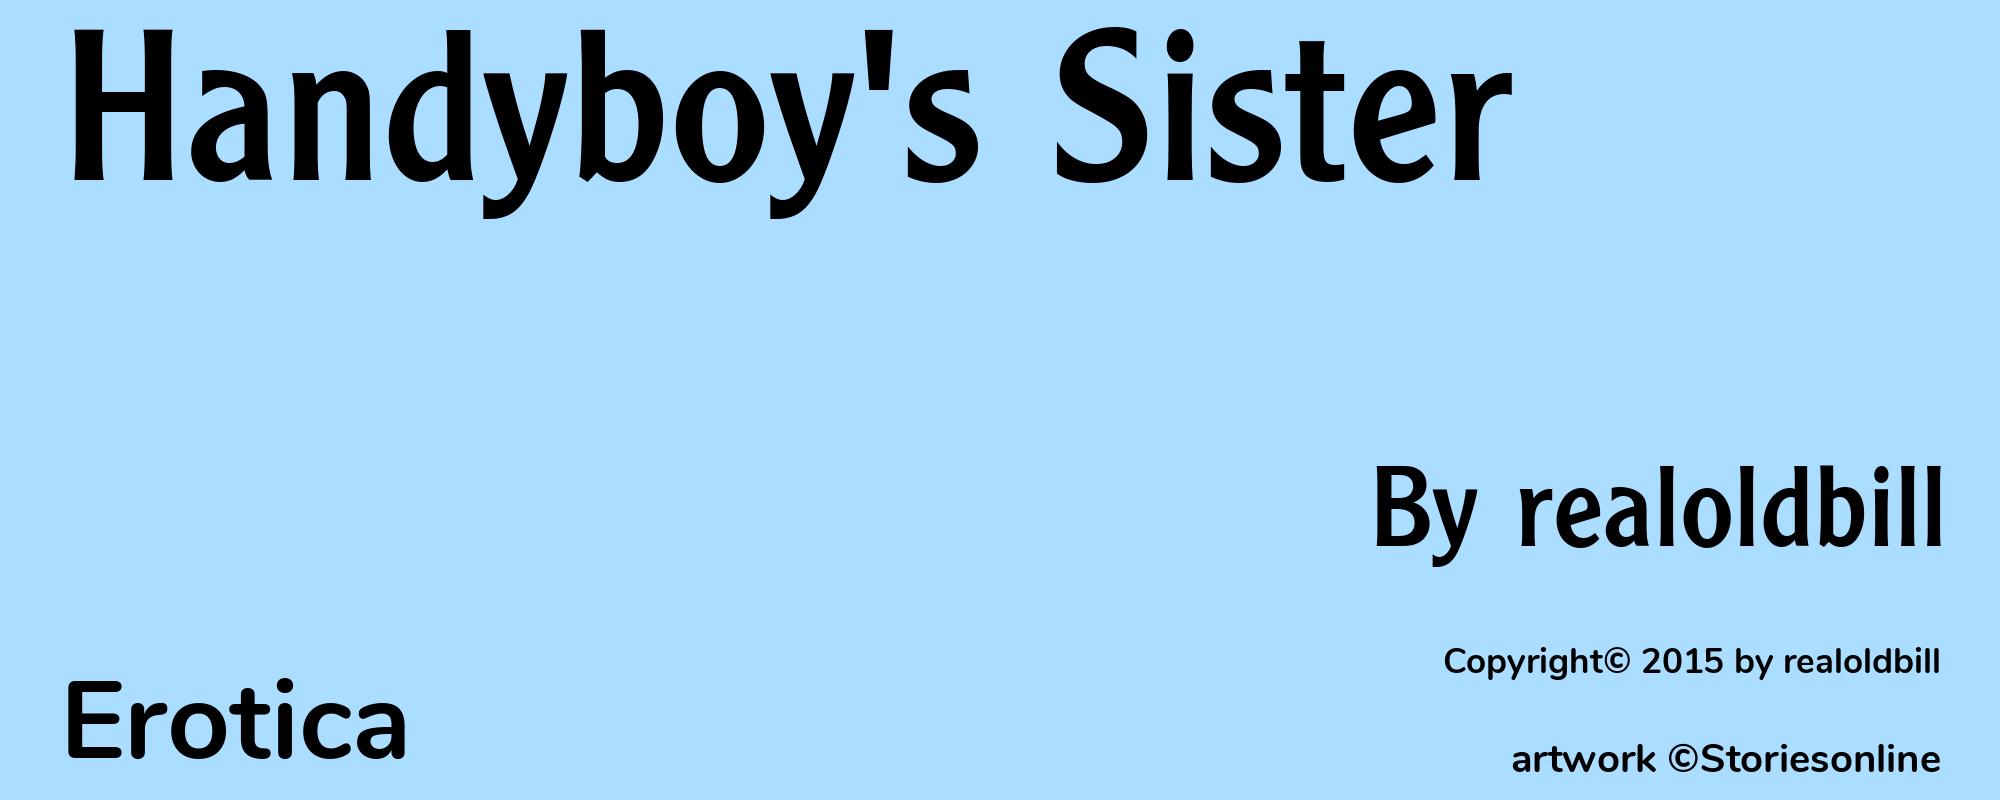 Handyboy's Sister - Cover